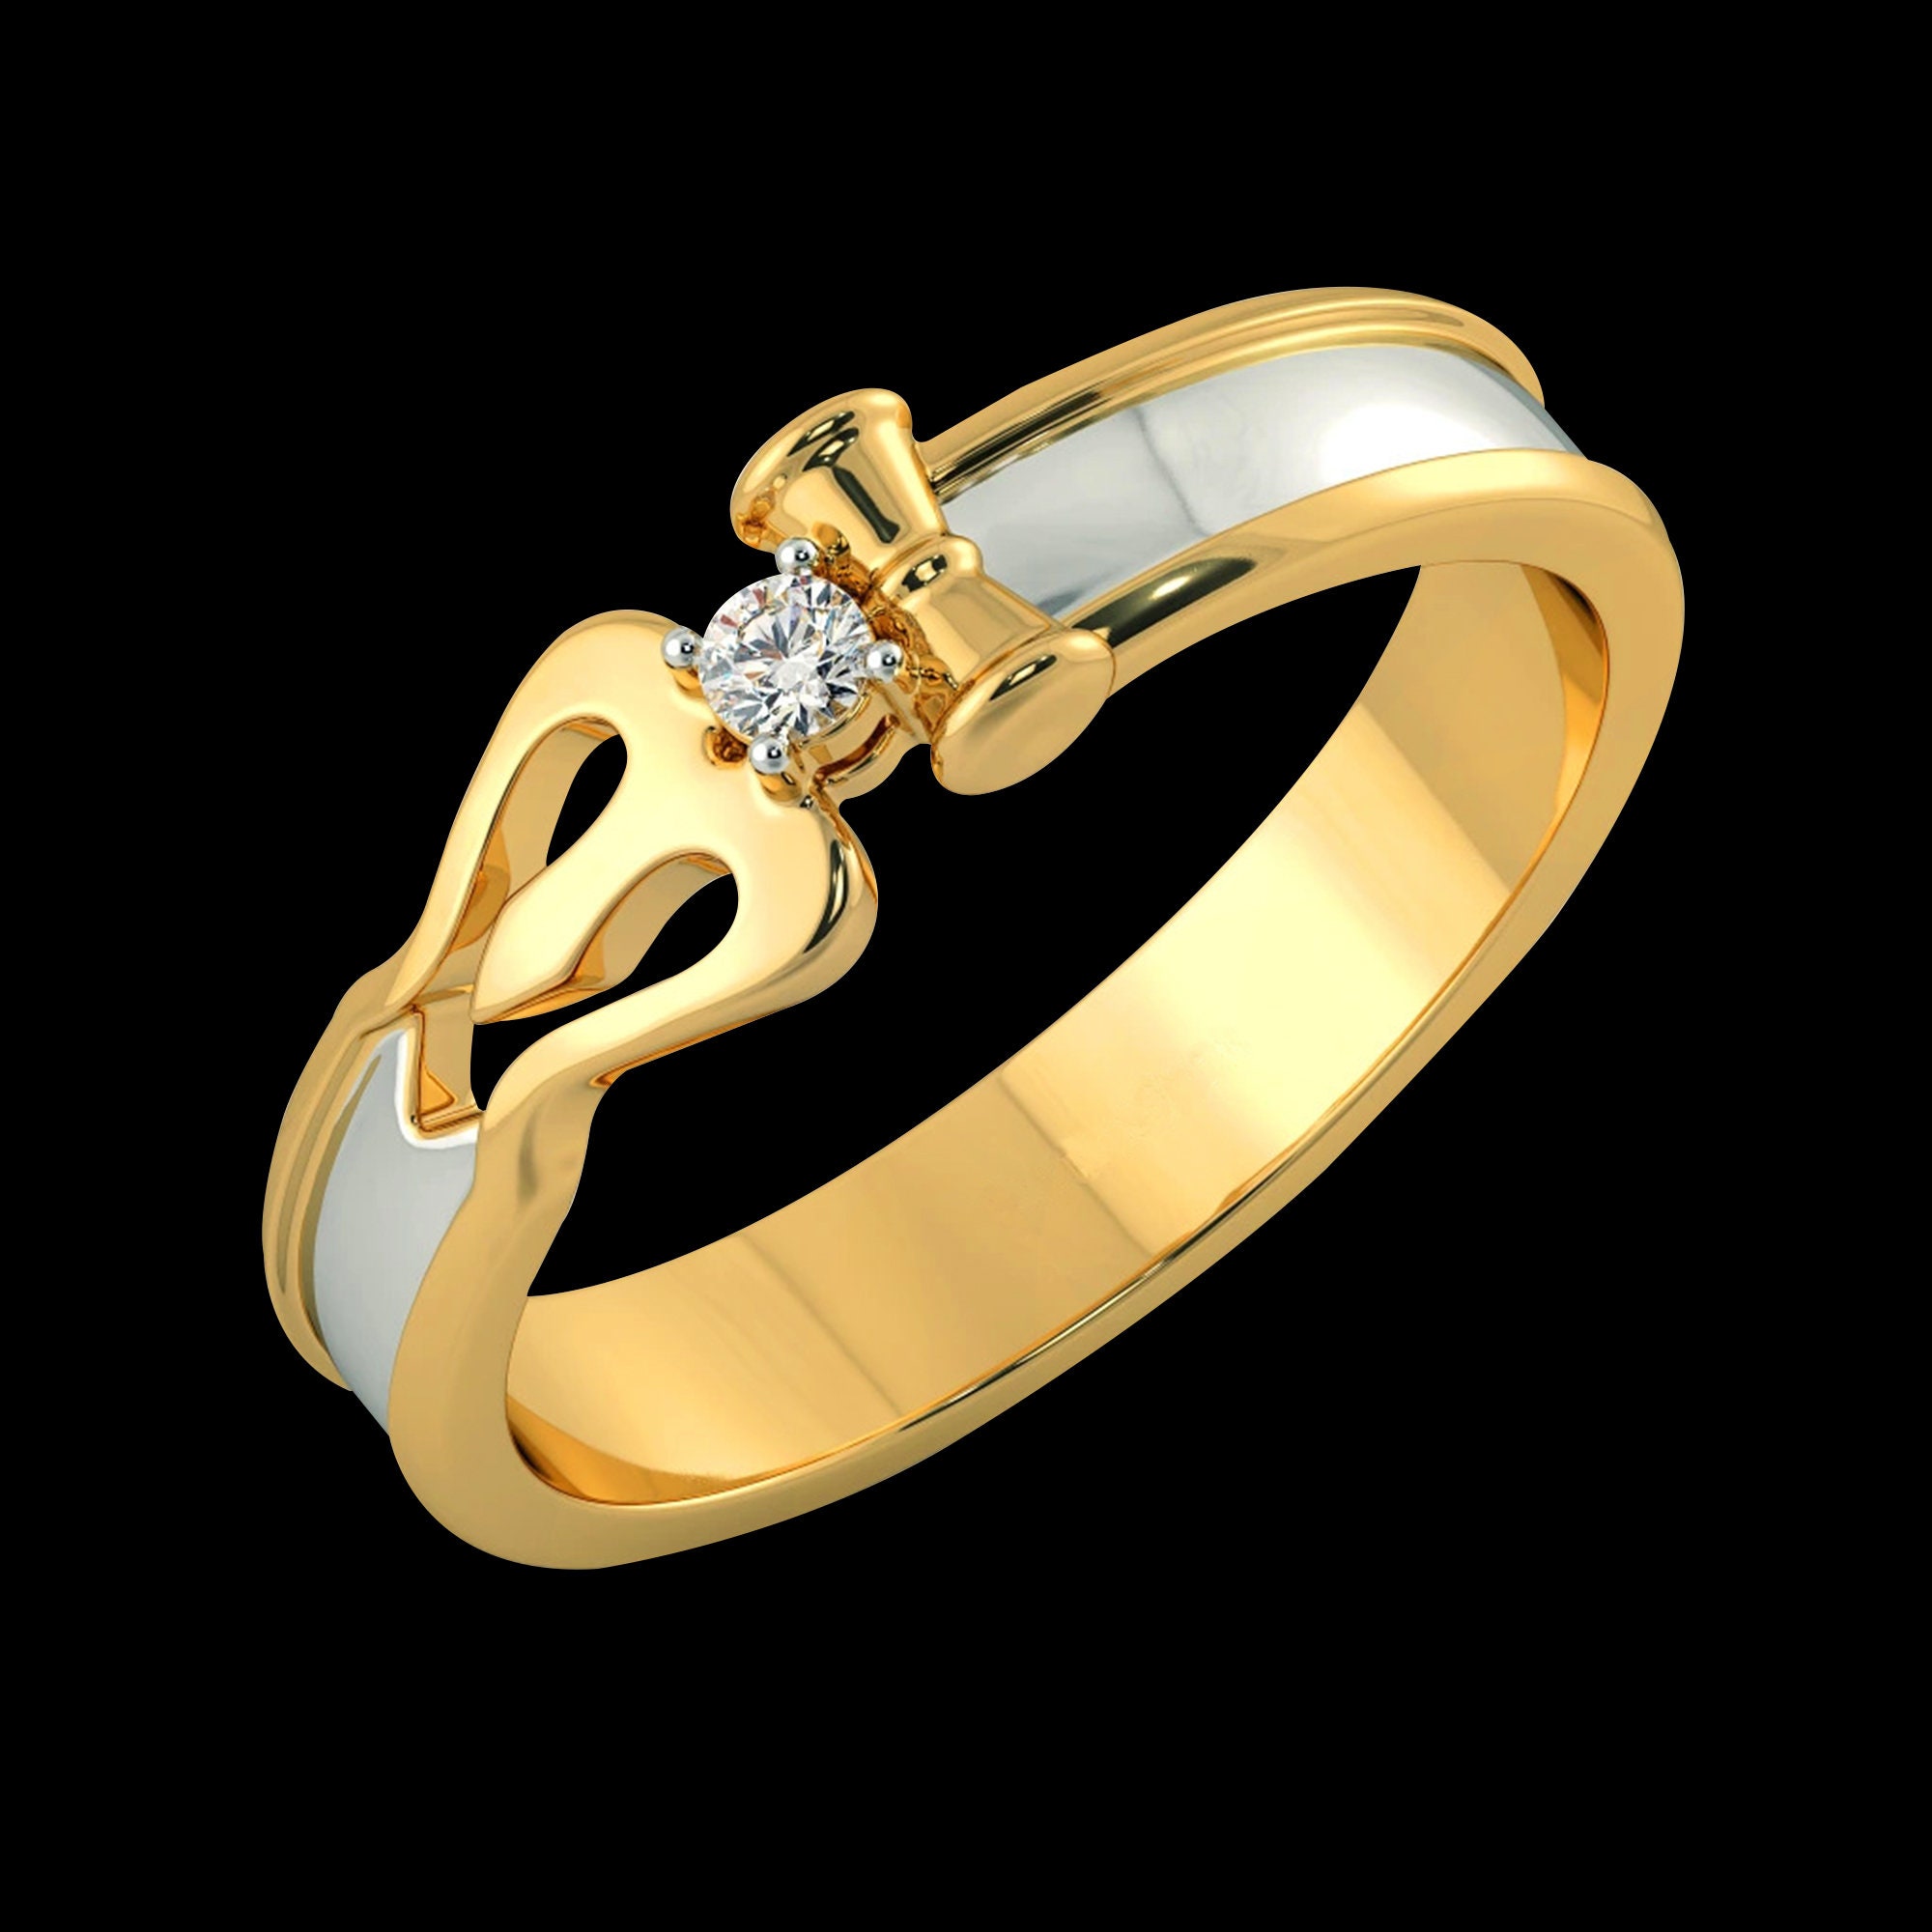 Buy Lord Shiva Fancy Design Rings 55 | Lord Shiva Fancy Design Rings 55  Price, Benefits, Colours - Dhaiv.com